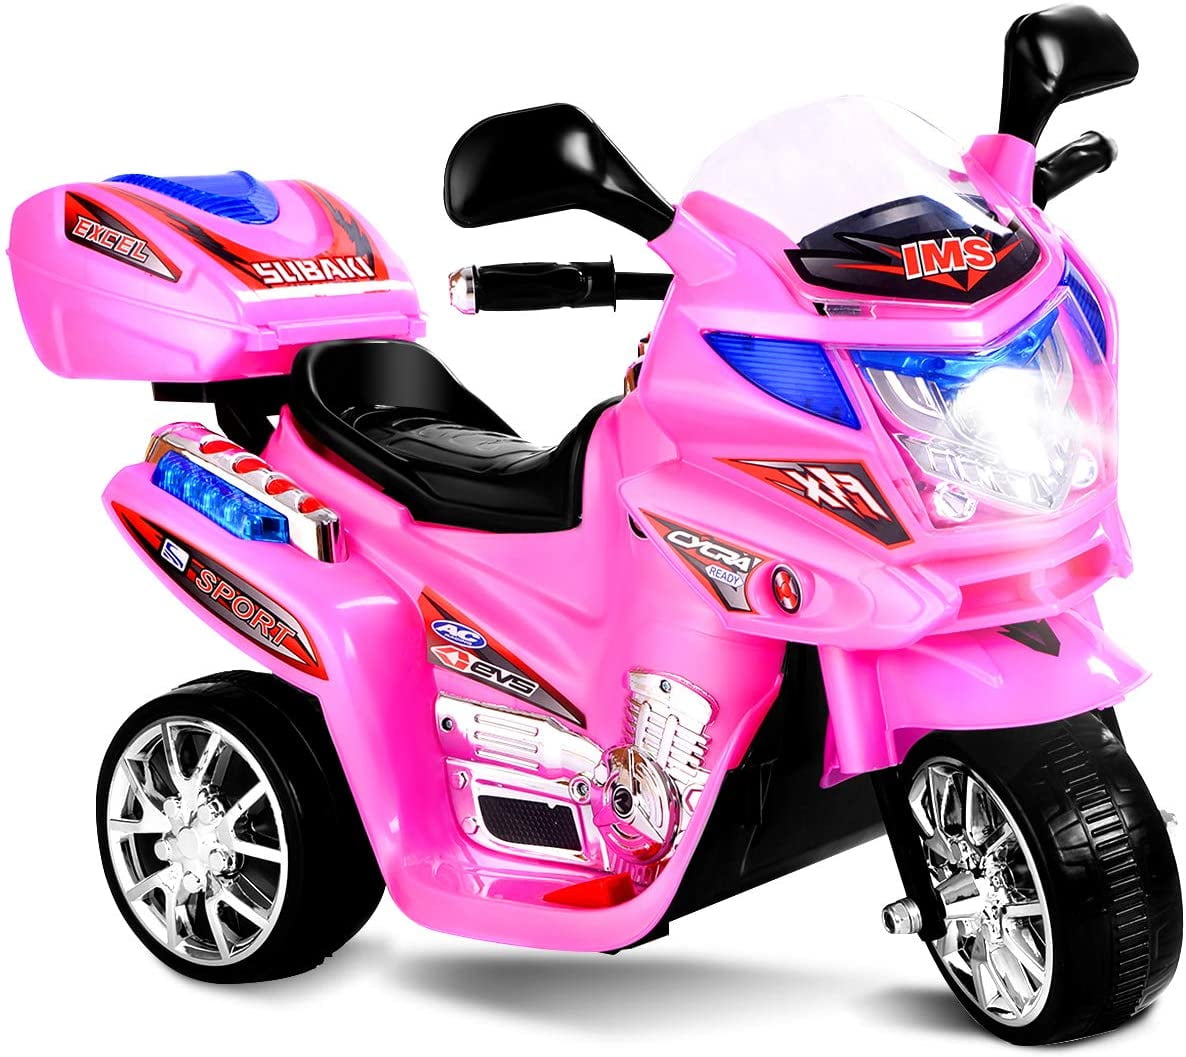 Light Pink Ride On Scooter 6V Toy Battery Powered Electric Bicyle W/Music Horn